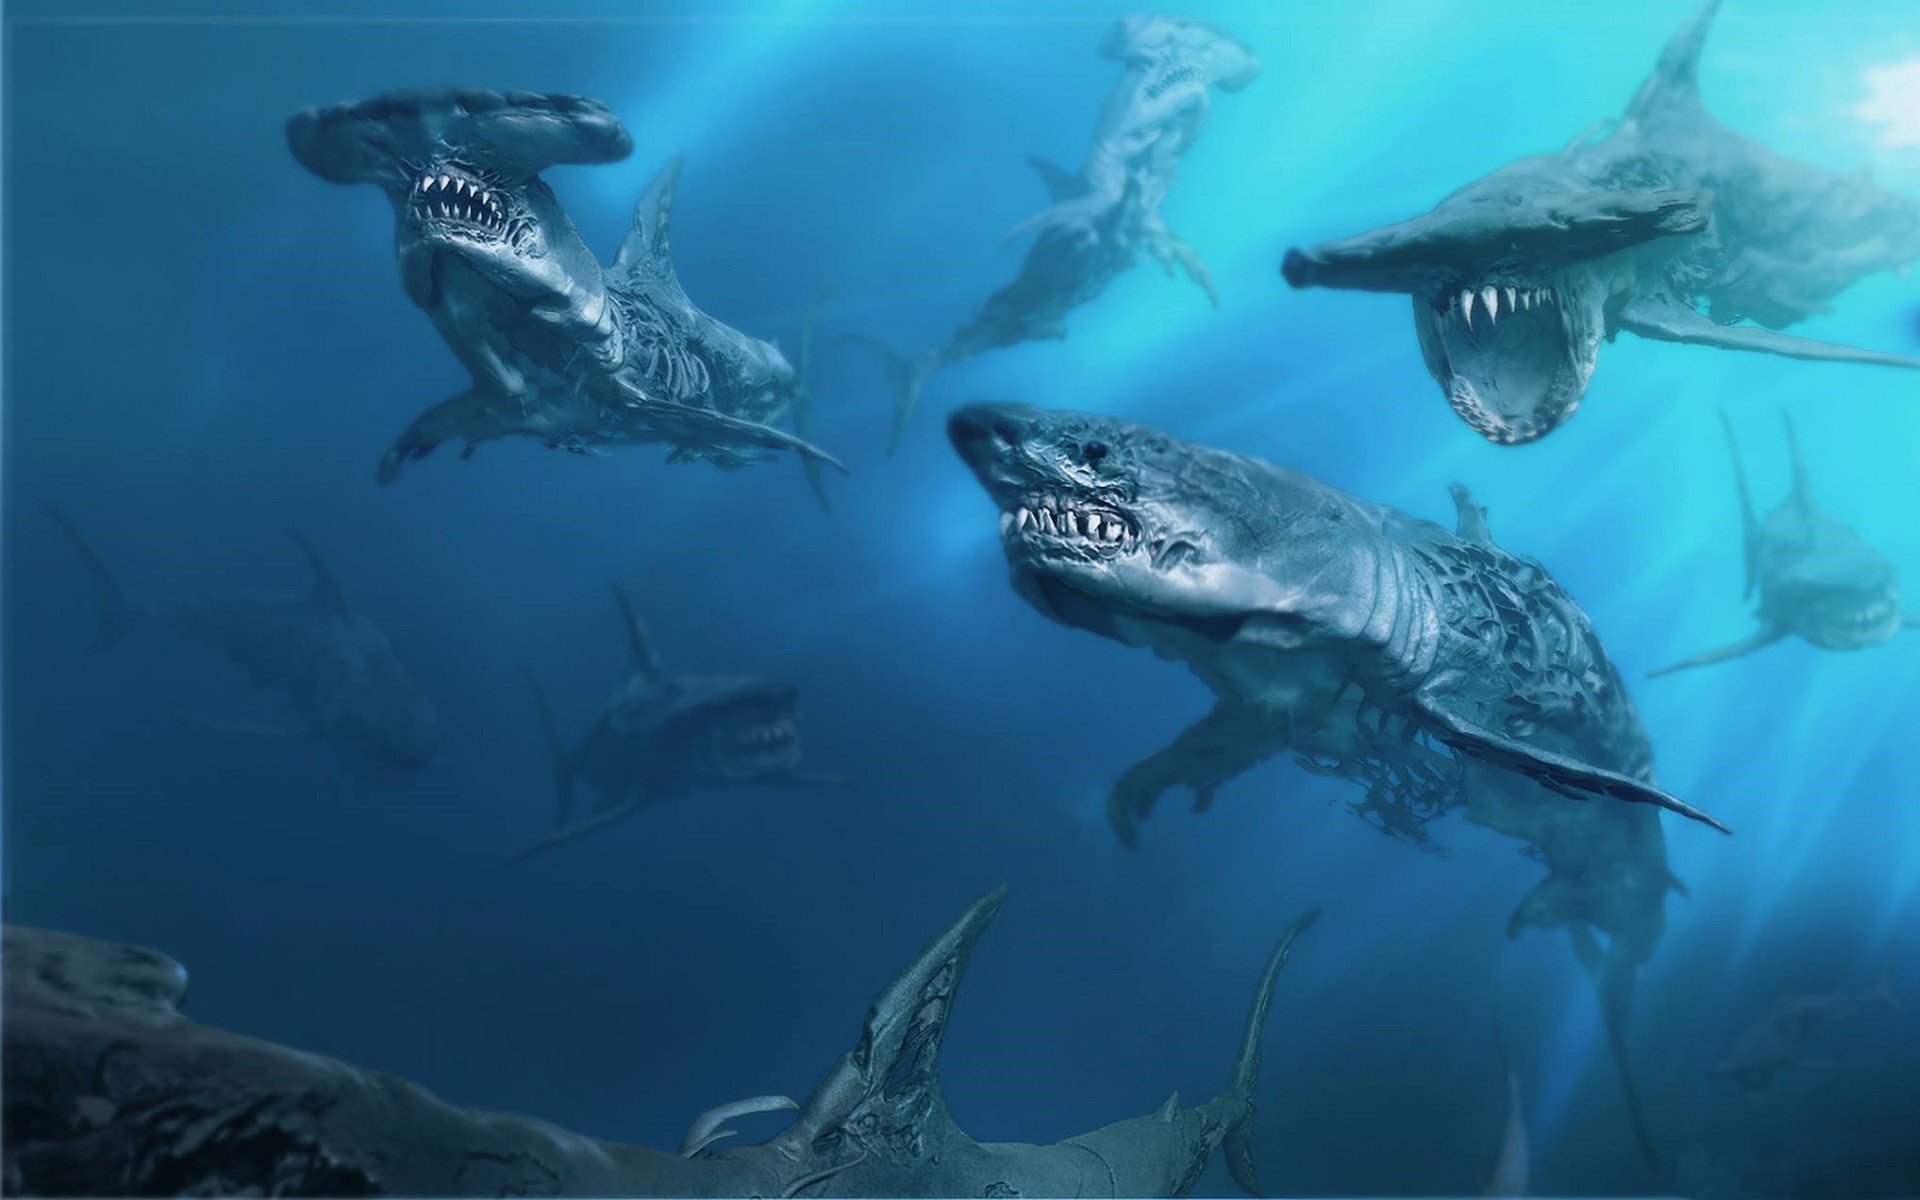 General 1920x1200 Pirates of the Caribbean: Dead Men Tell No Tales shark movies animals sea underwater artwork concept art ghost zombies Pirates of the Caribbean